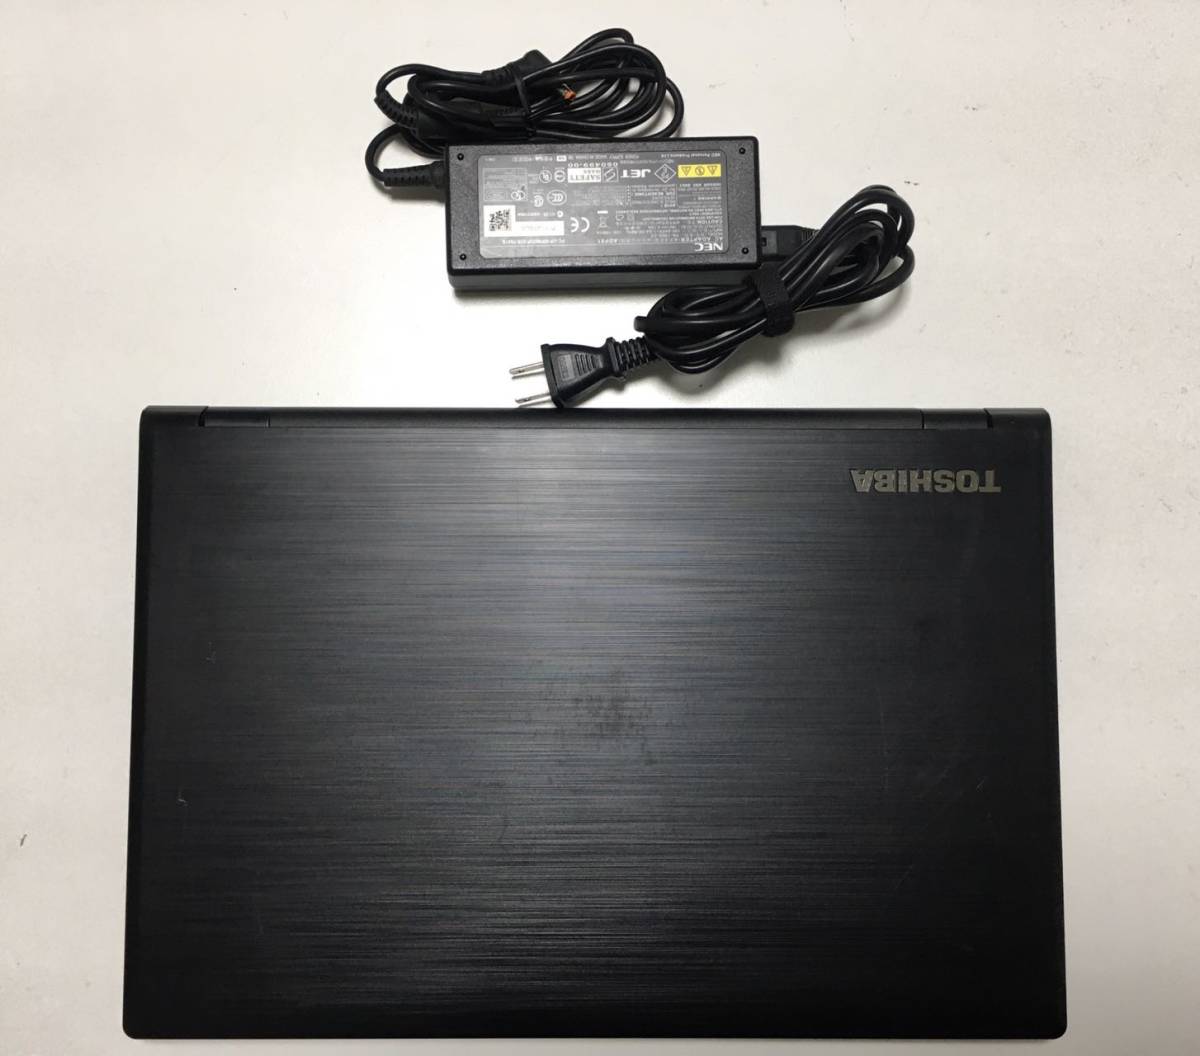 P103 operation excellent! SSD installing Toshiba business Note high capacity memory 8GB DVD multi wireless web camera Bluetooth HDMI numeric keypad 